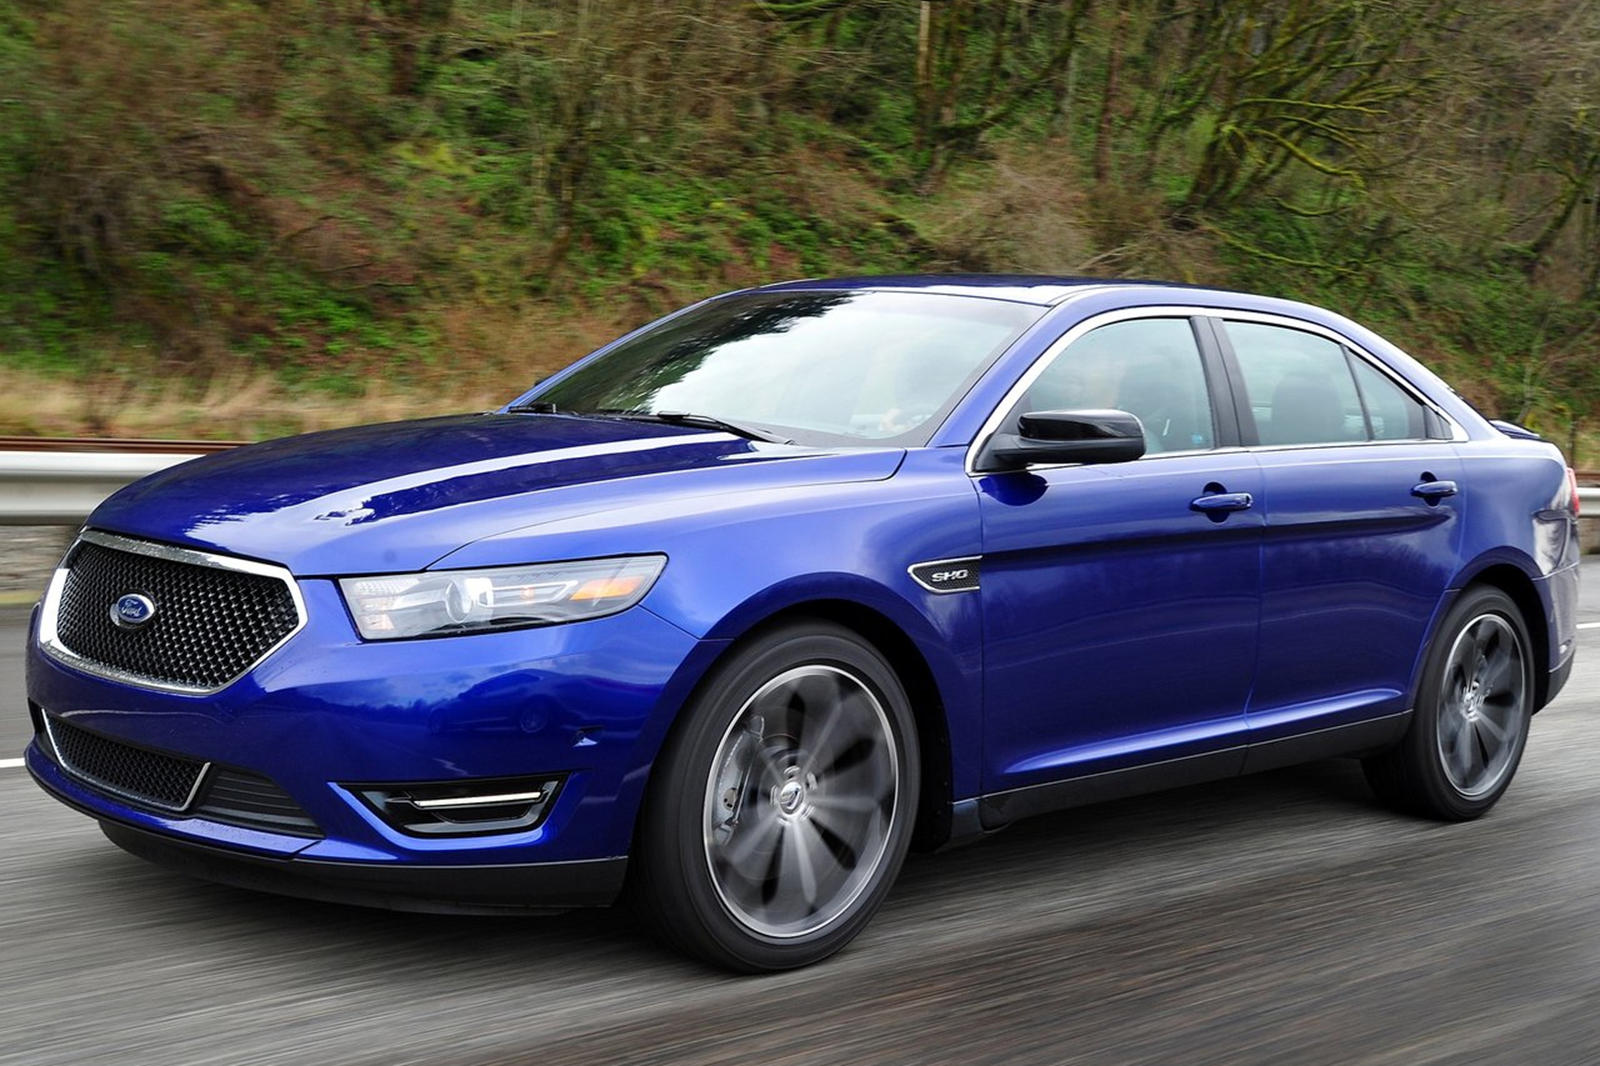 Ford Selling 365-HP Taurus SHO With $3,000 Discount.